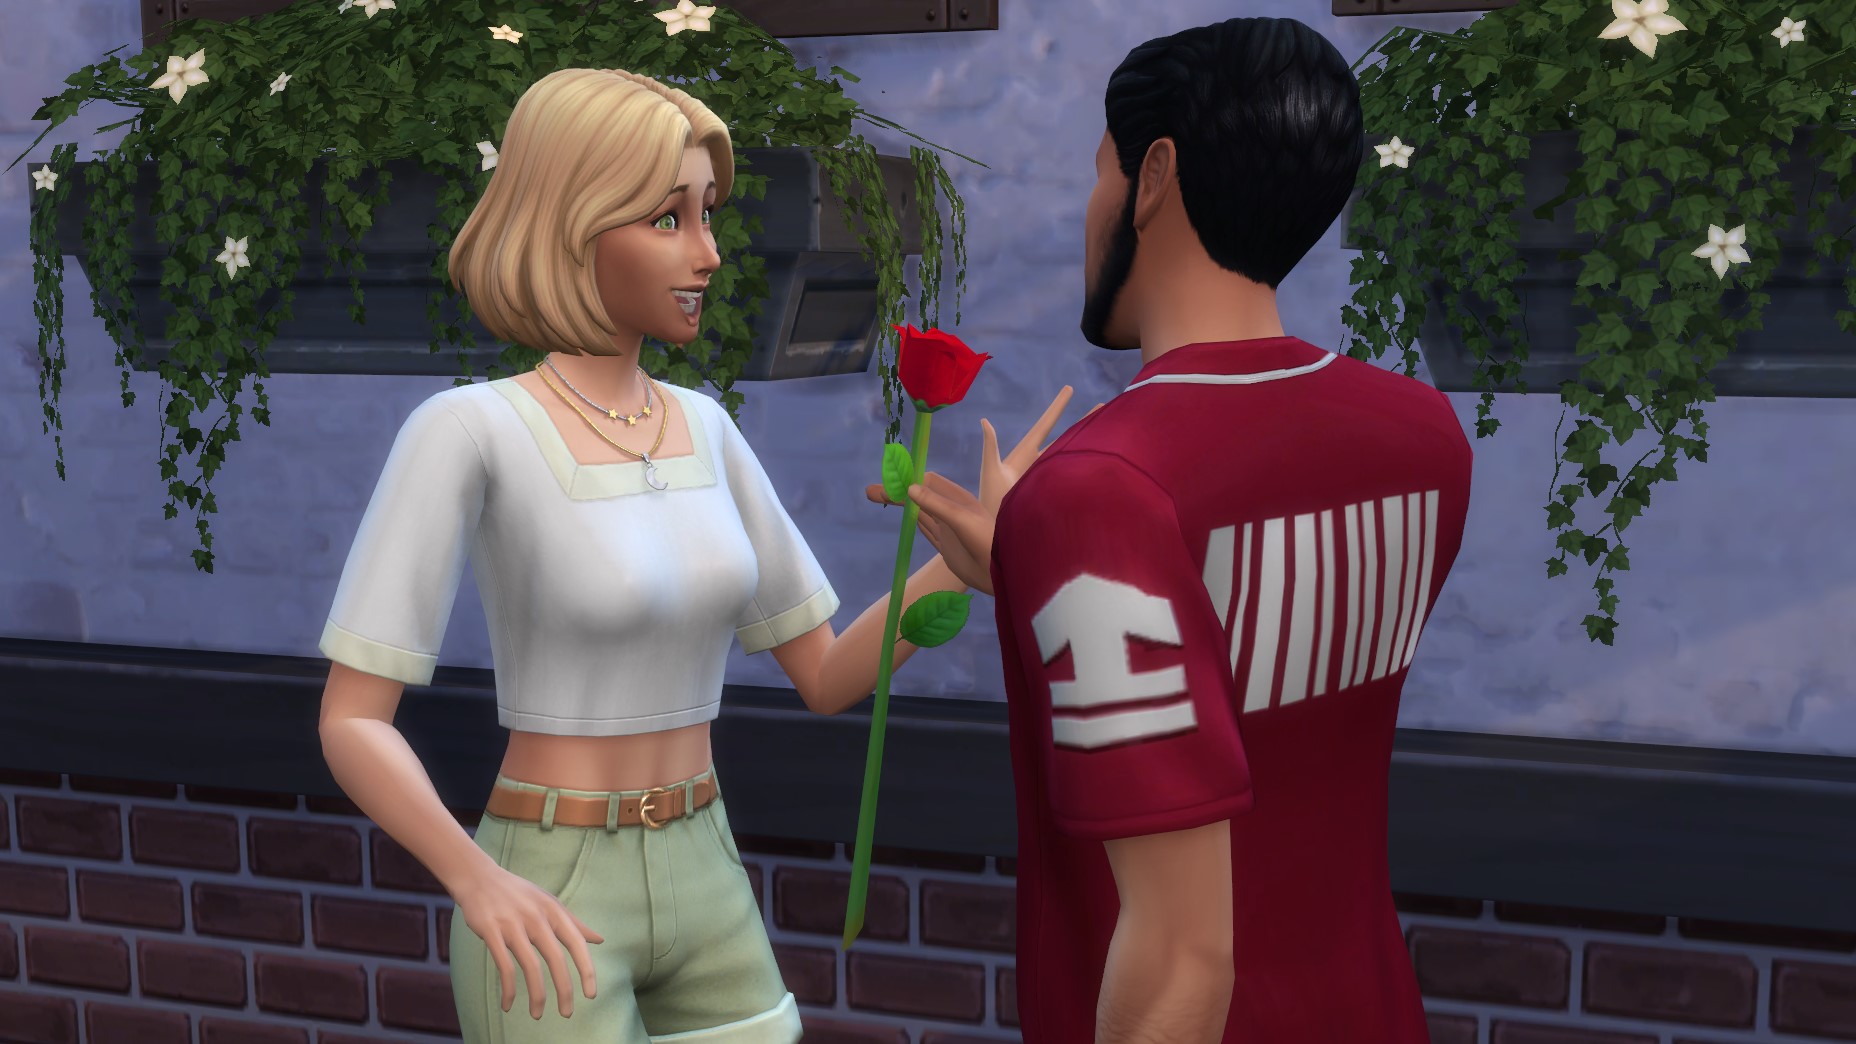  The Sims 4 romantic boundaries settings: What they mean and how to change them 